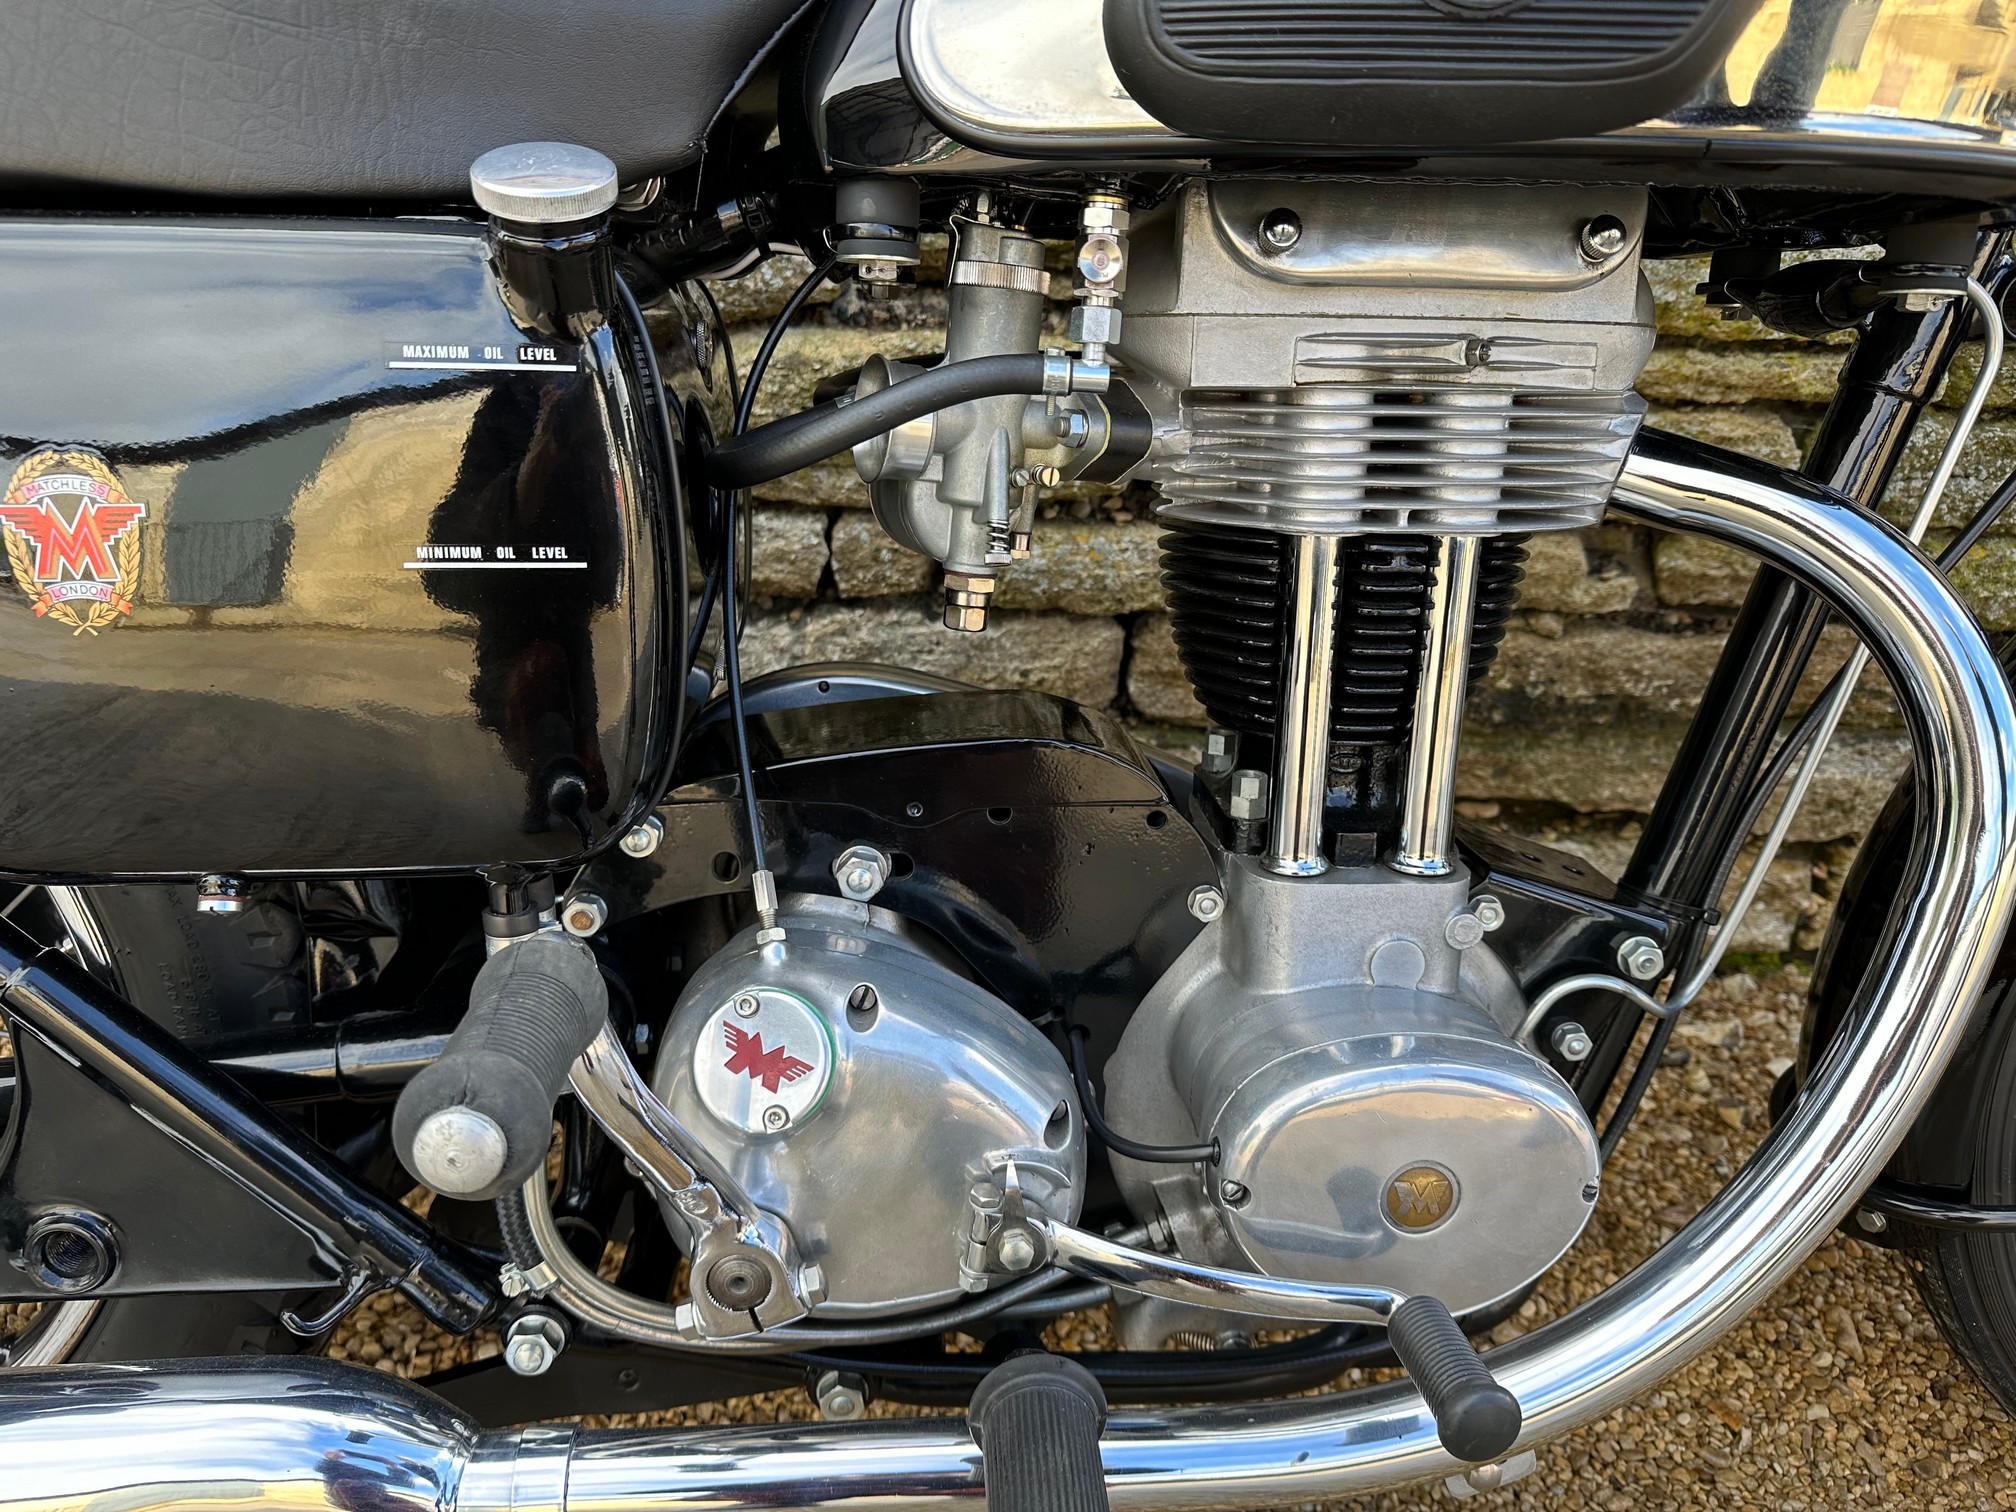 1957 MATCHLESS G3LS 350cc - Image 6 of 7